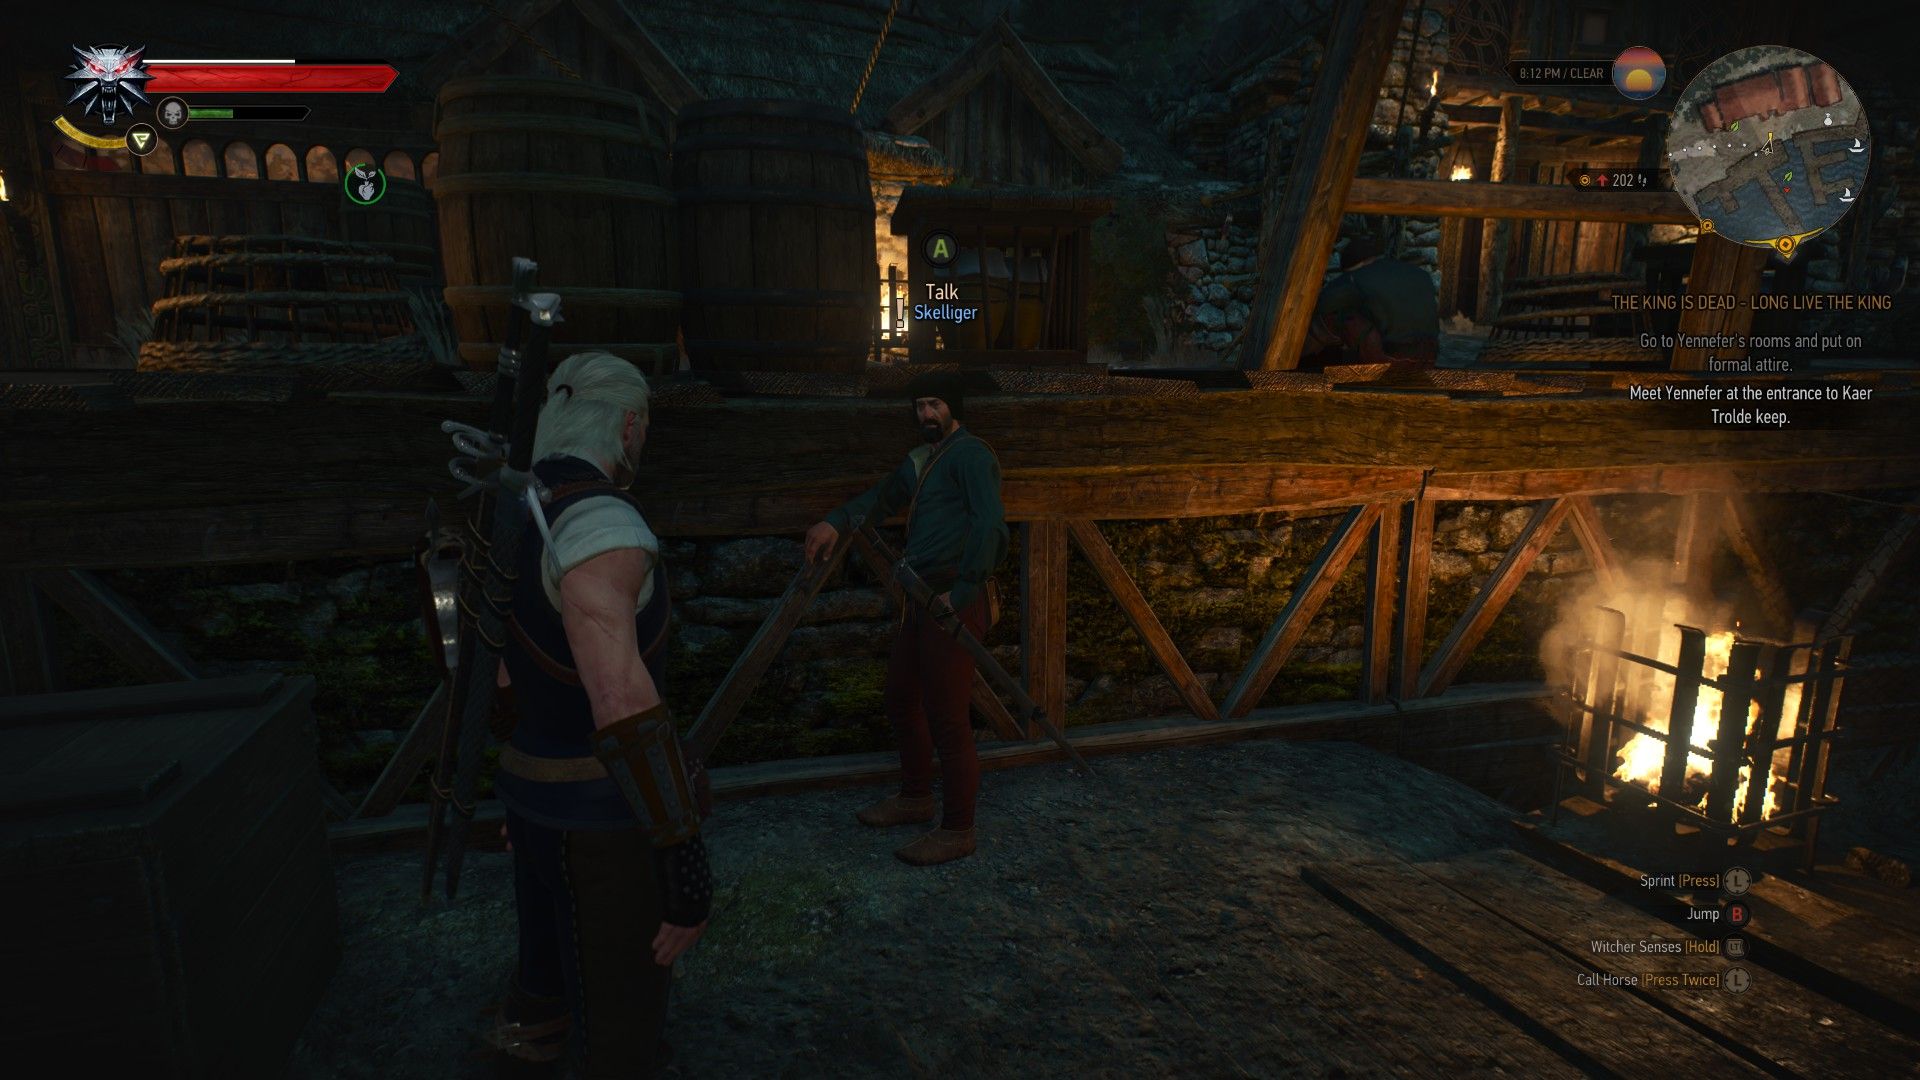 Screenshot of Geralt talking to Skelliger at the port in The Witcher 3.